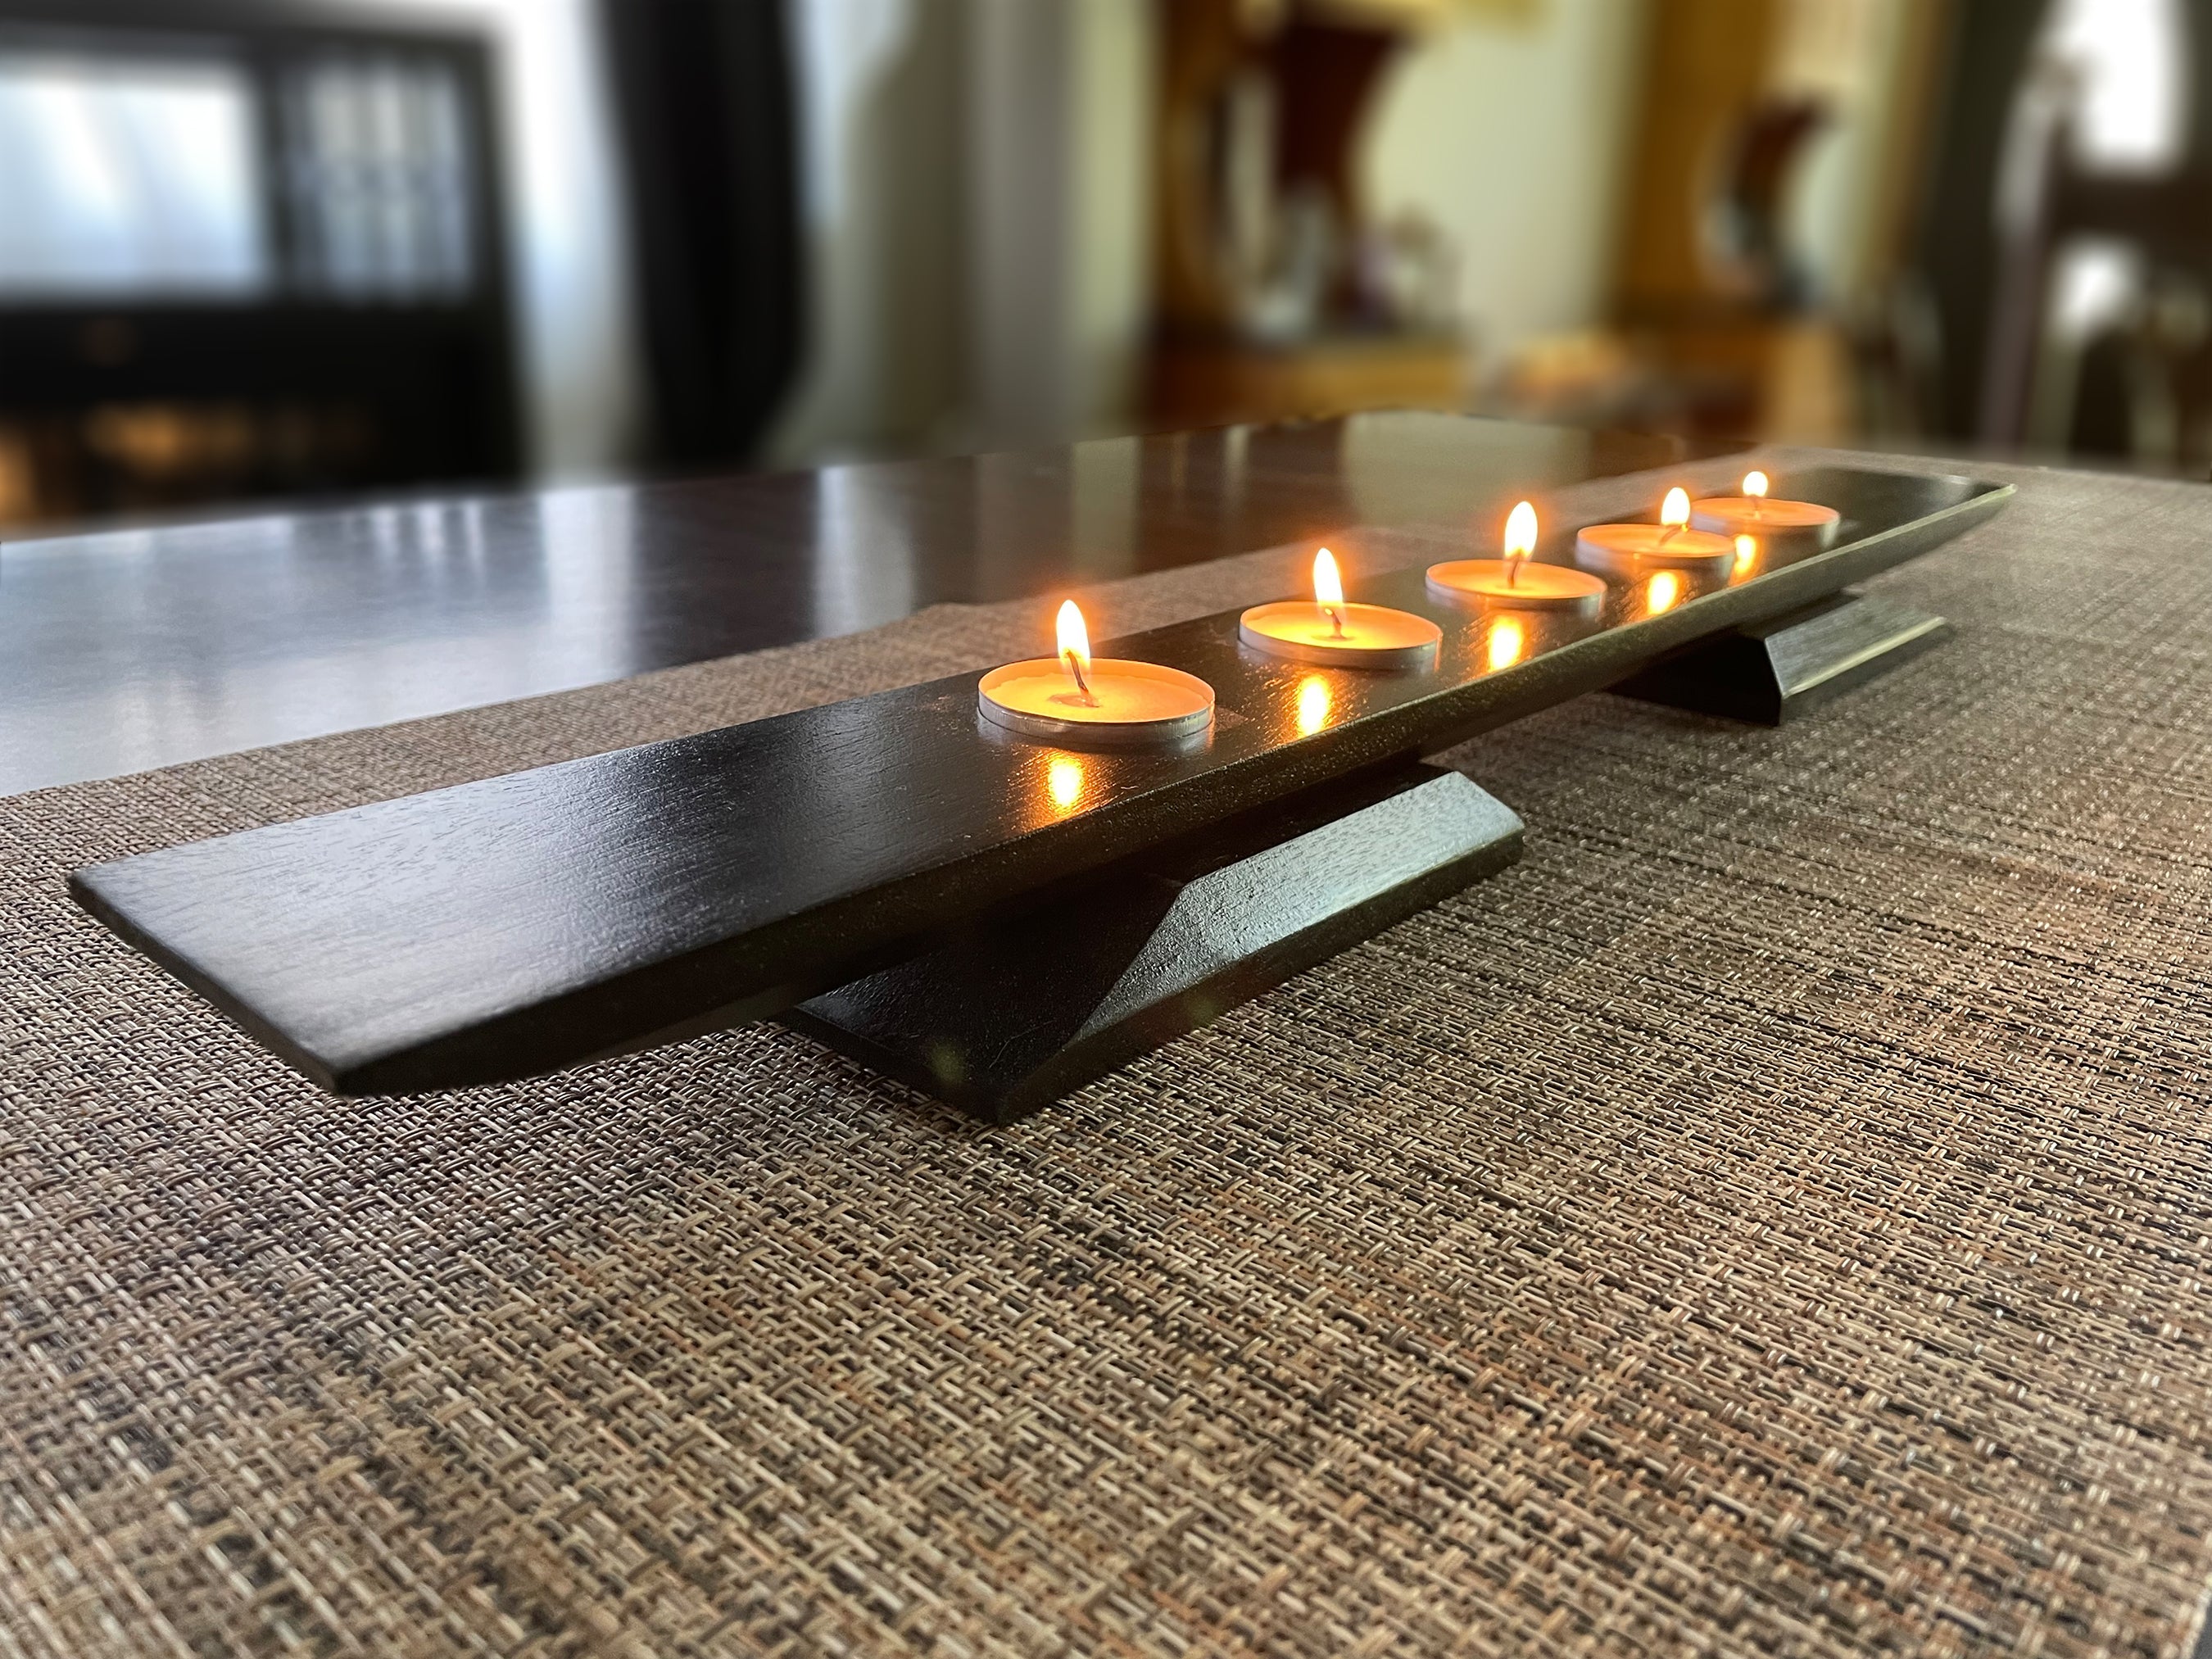 Unique Handmade Tea Light Holders: Perfect for Any Occasion